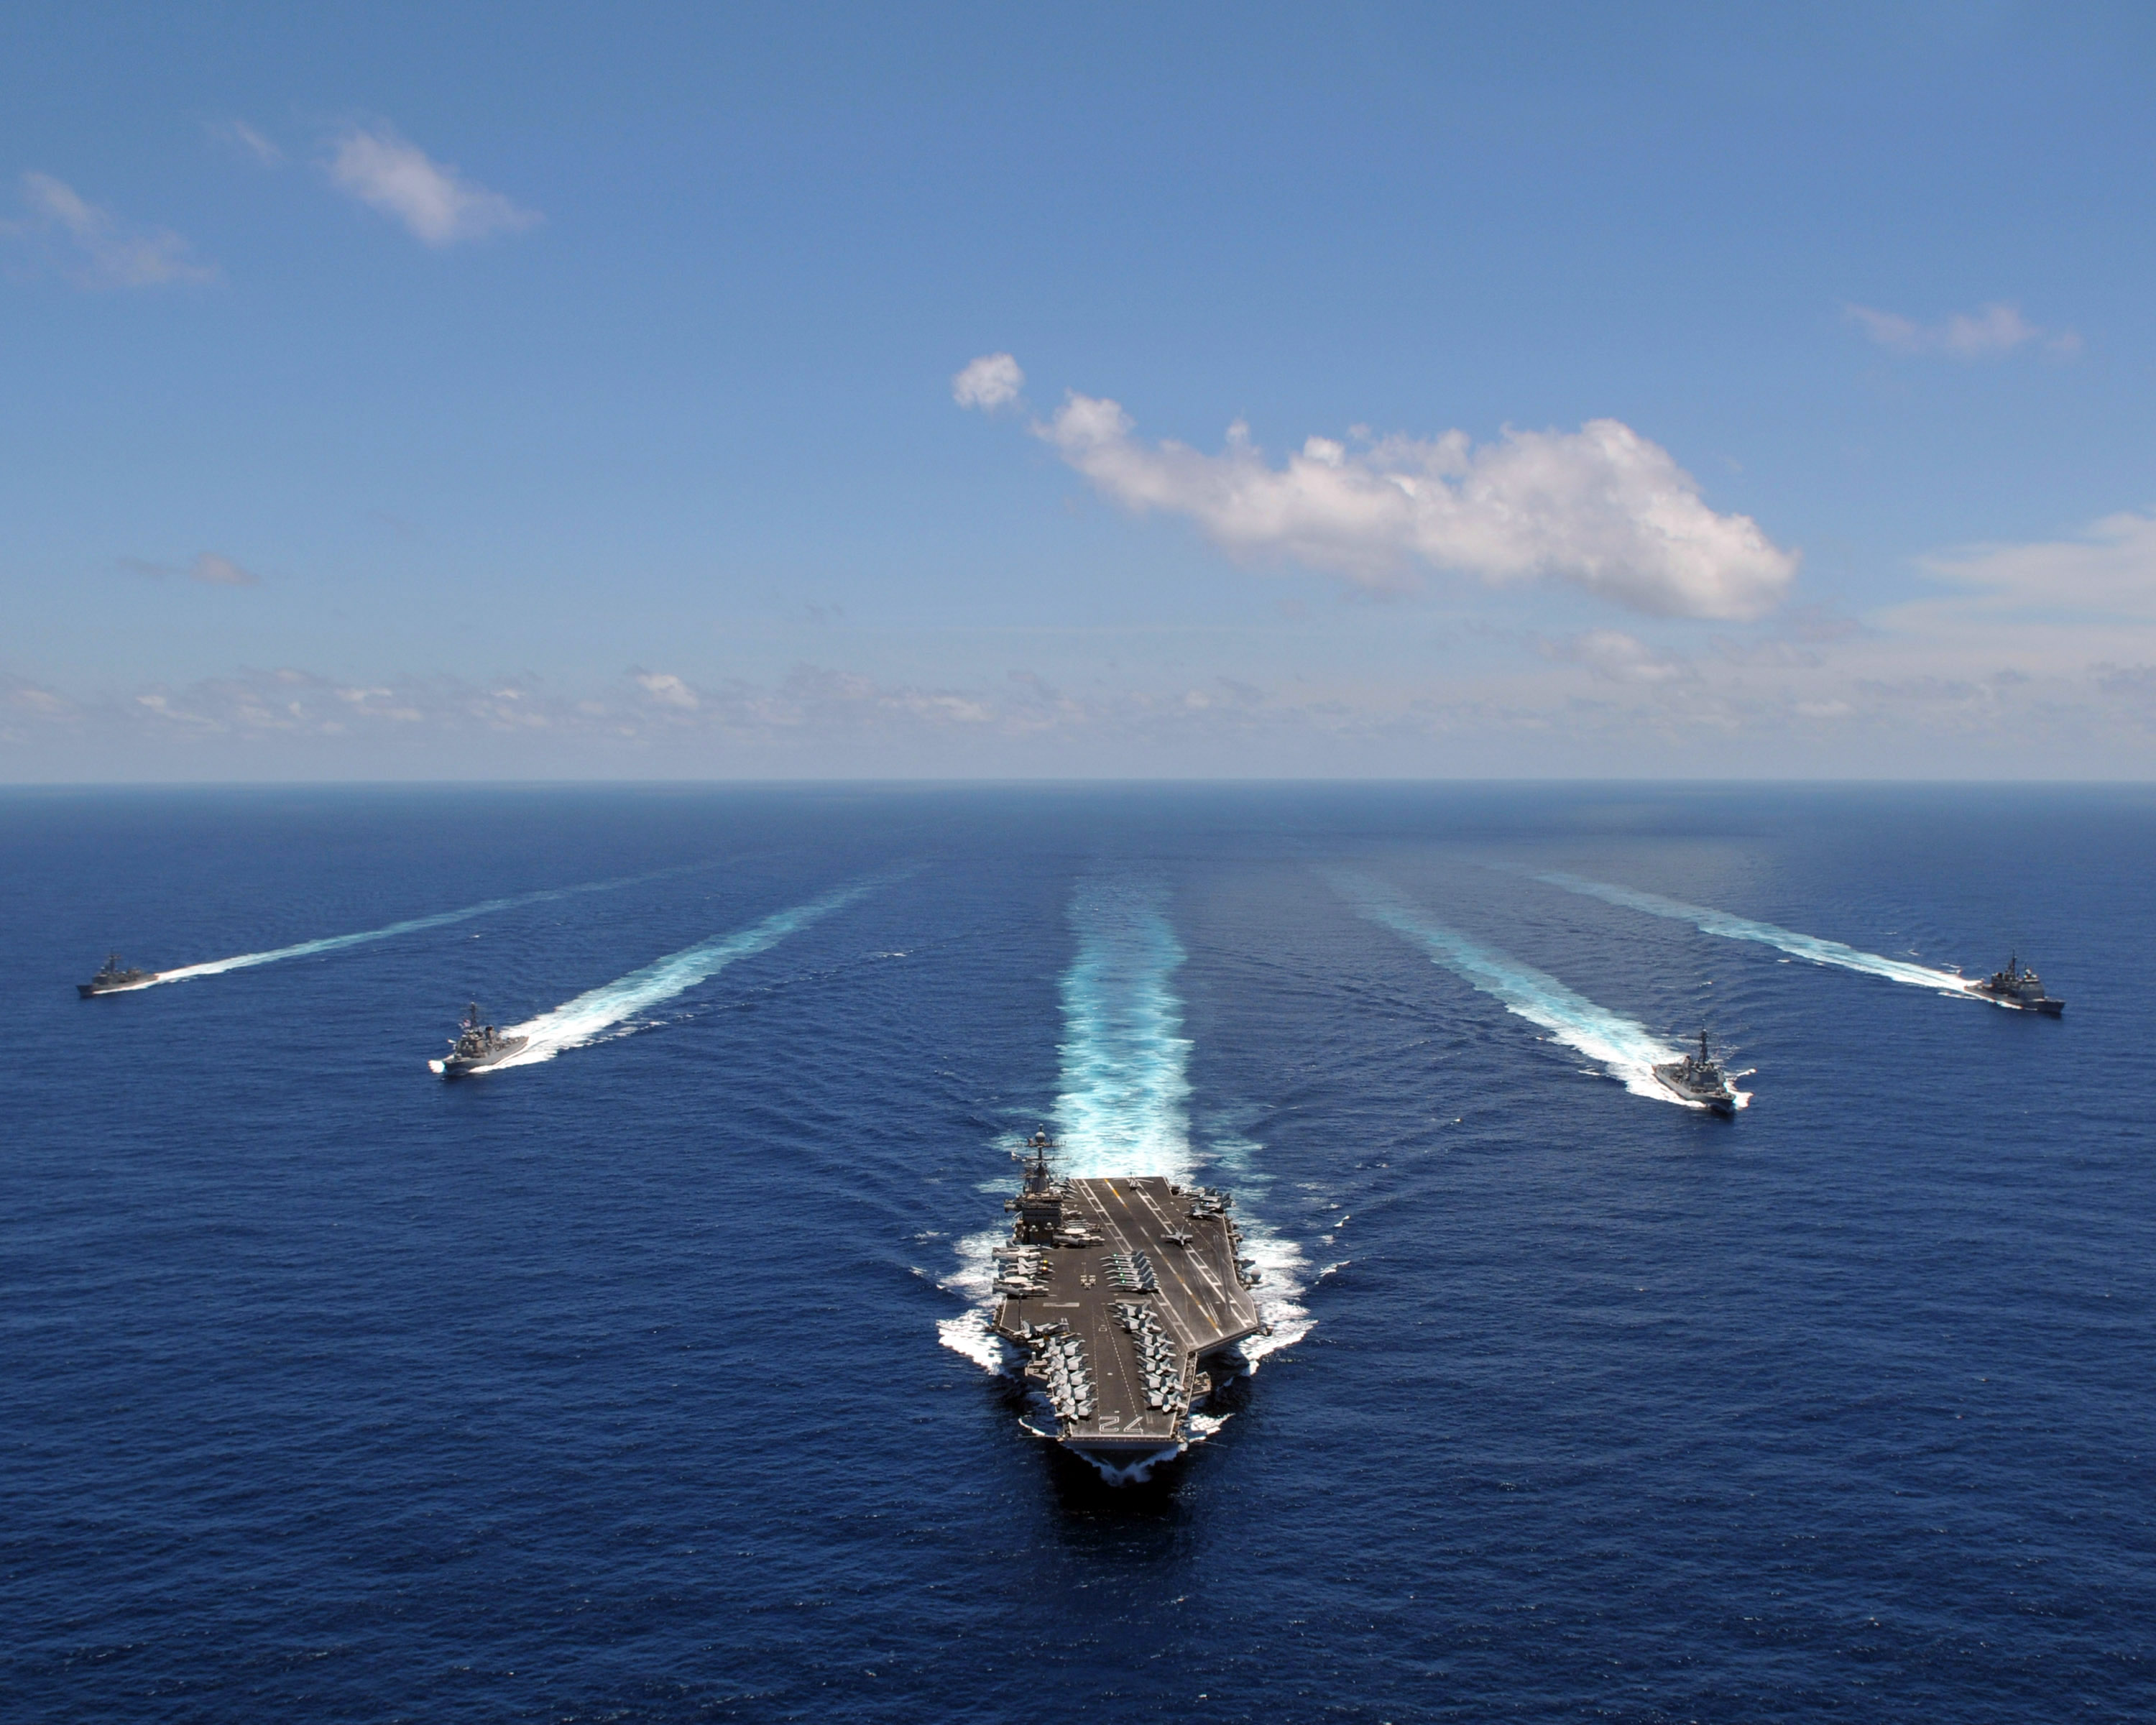 US Navy 080905-N-7981E-845 The aircraft carrier USS Abraham Lincoln (CVN 72) leads a formation of ships from the Abraham Lincoln Strike Group they transit the Indian Ocean